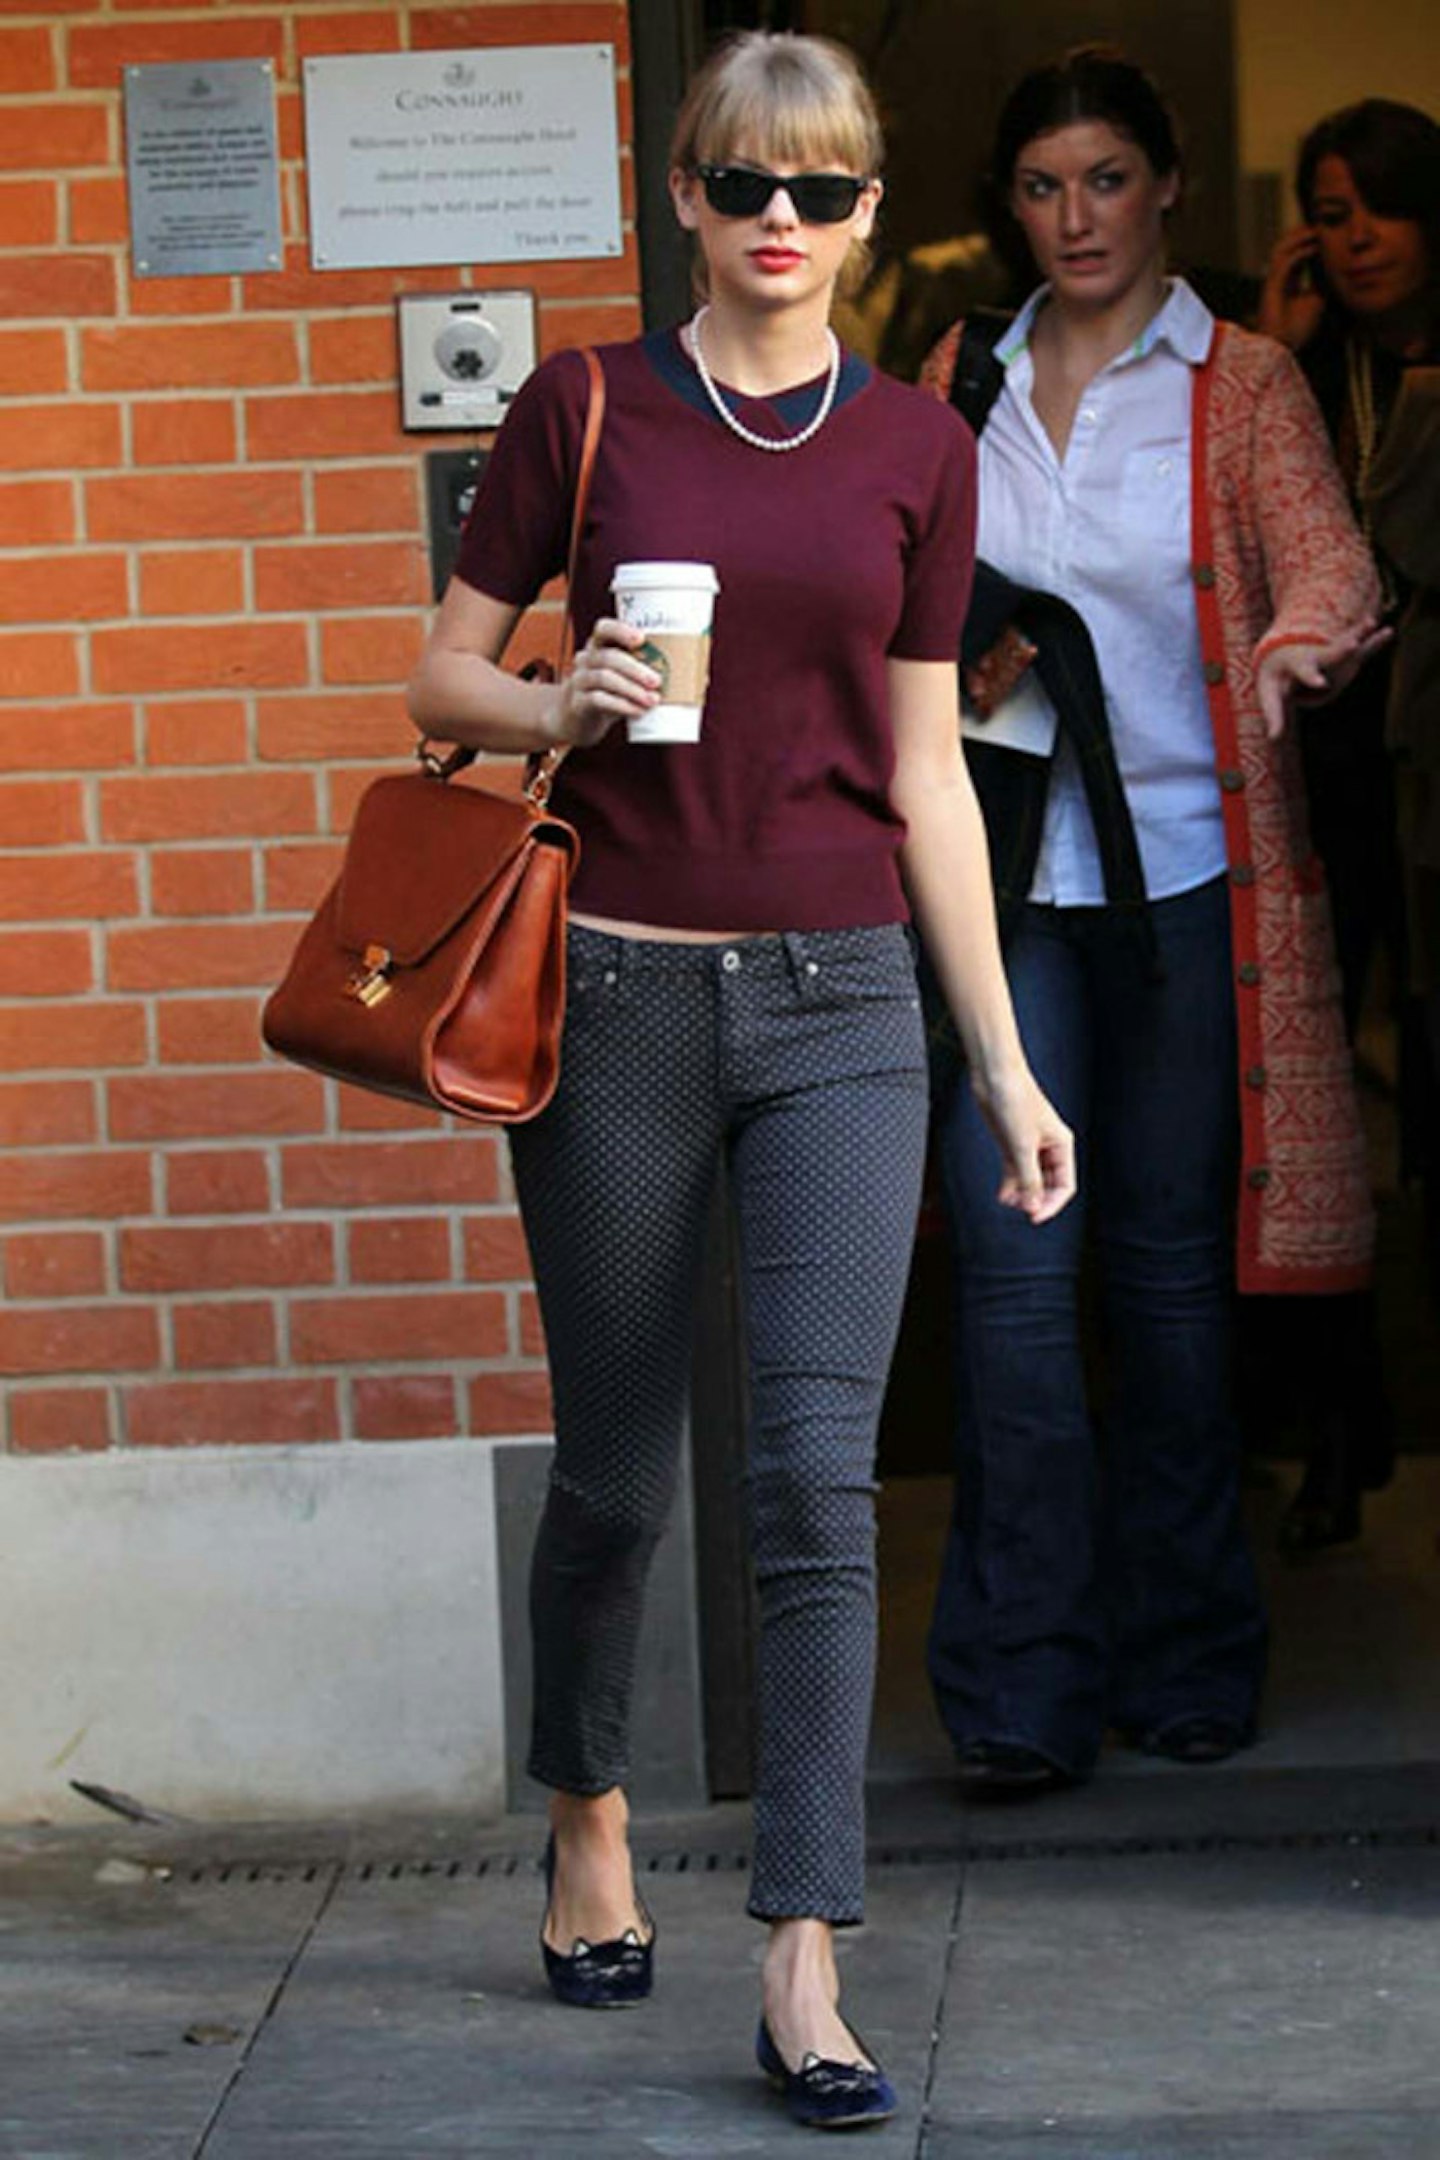 Taylor Swift in London, 4 October 2012